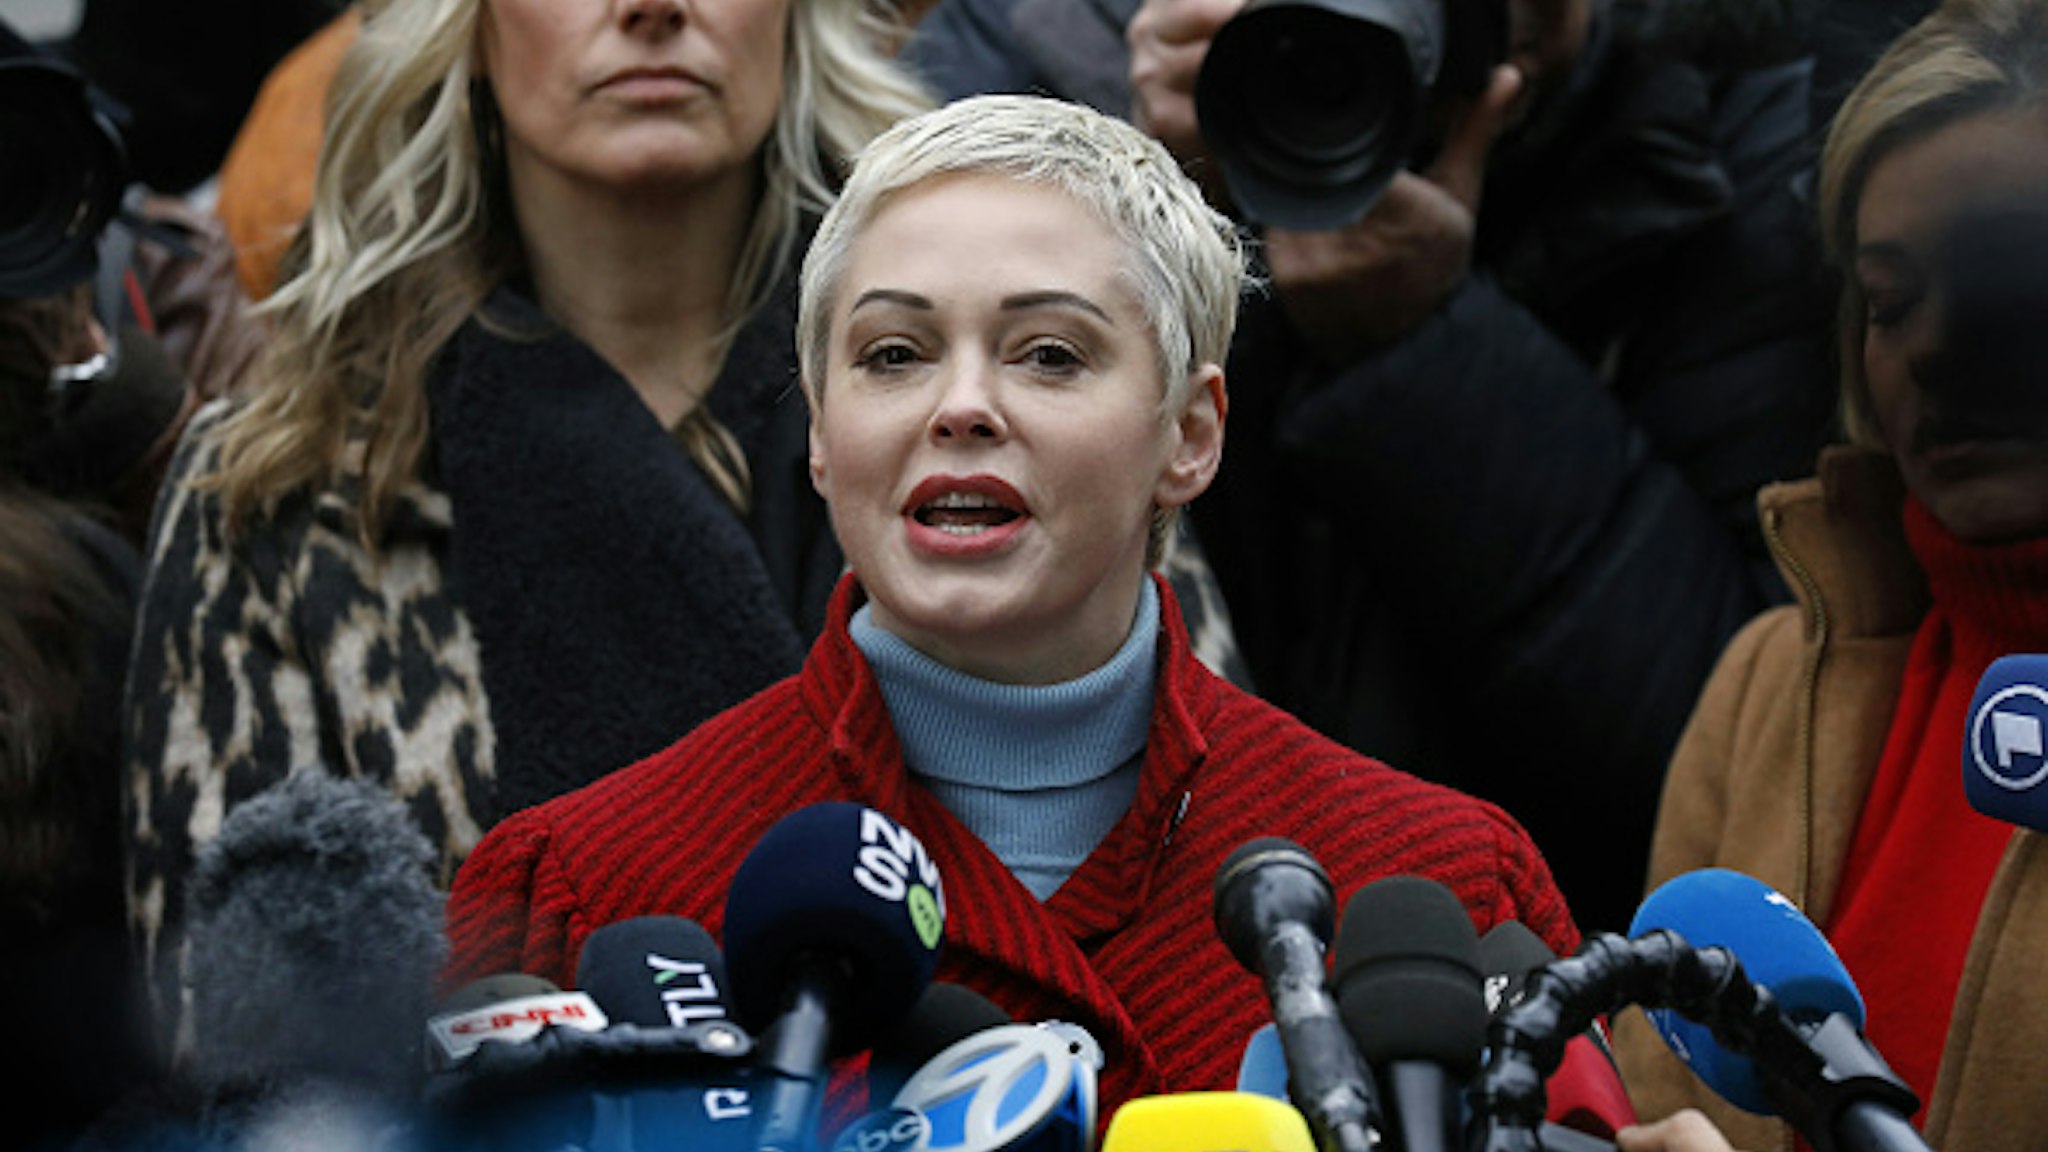 Actress Rose McGowan speaks with members of the media after former Weinstein Co. Co-Chairman Harvey Weinstein arrives at state supreme court in New York, U.S., Monday, Jan. 6, 2020. Weinstein's criminal trial, on five felony counts, including predatory sexual assault and rape, is scheduled to begin on Monday in state court in Manhattan. Jury selection could last two weeks, the trial six more.